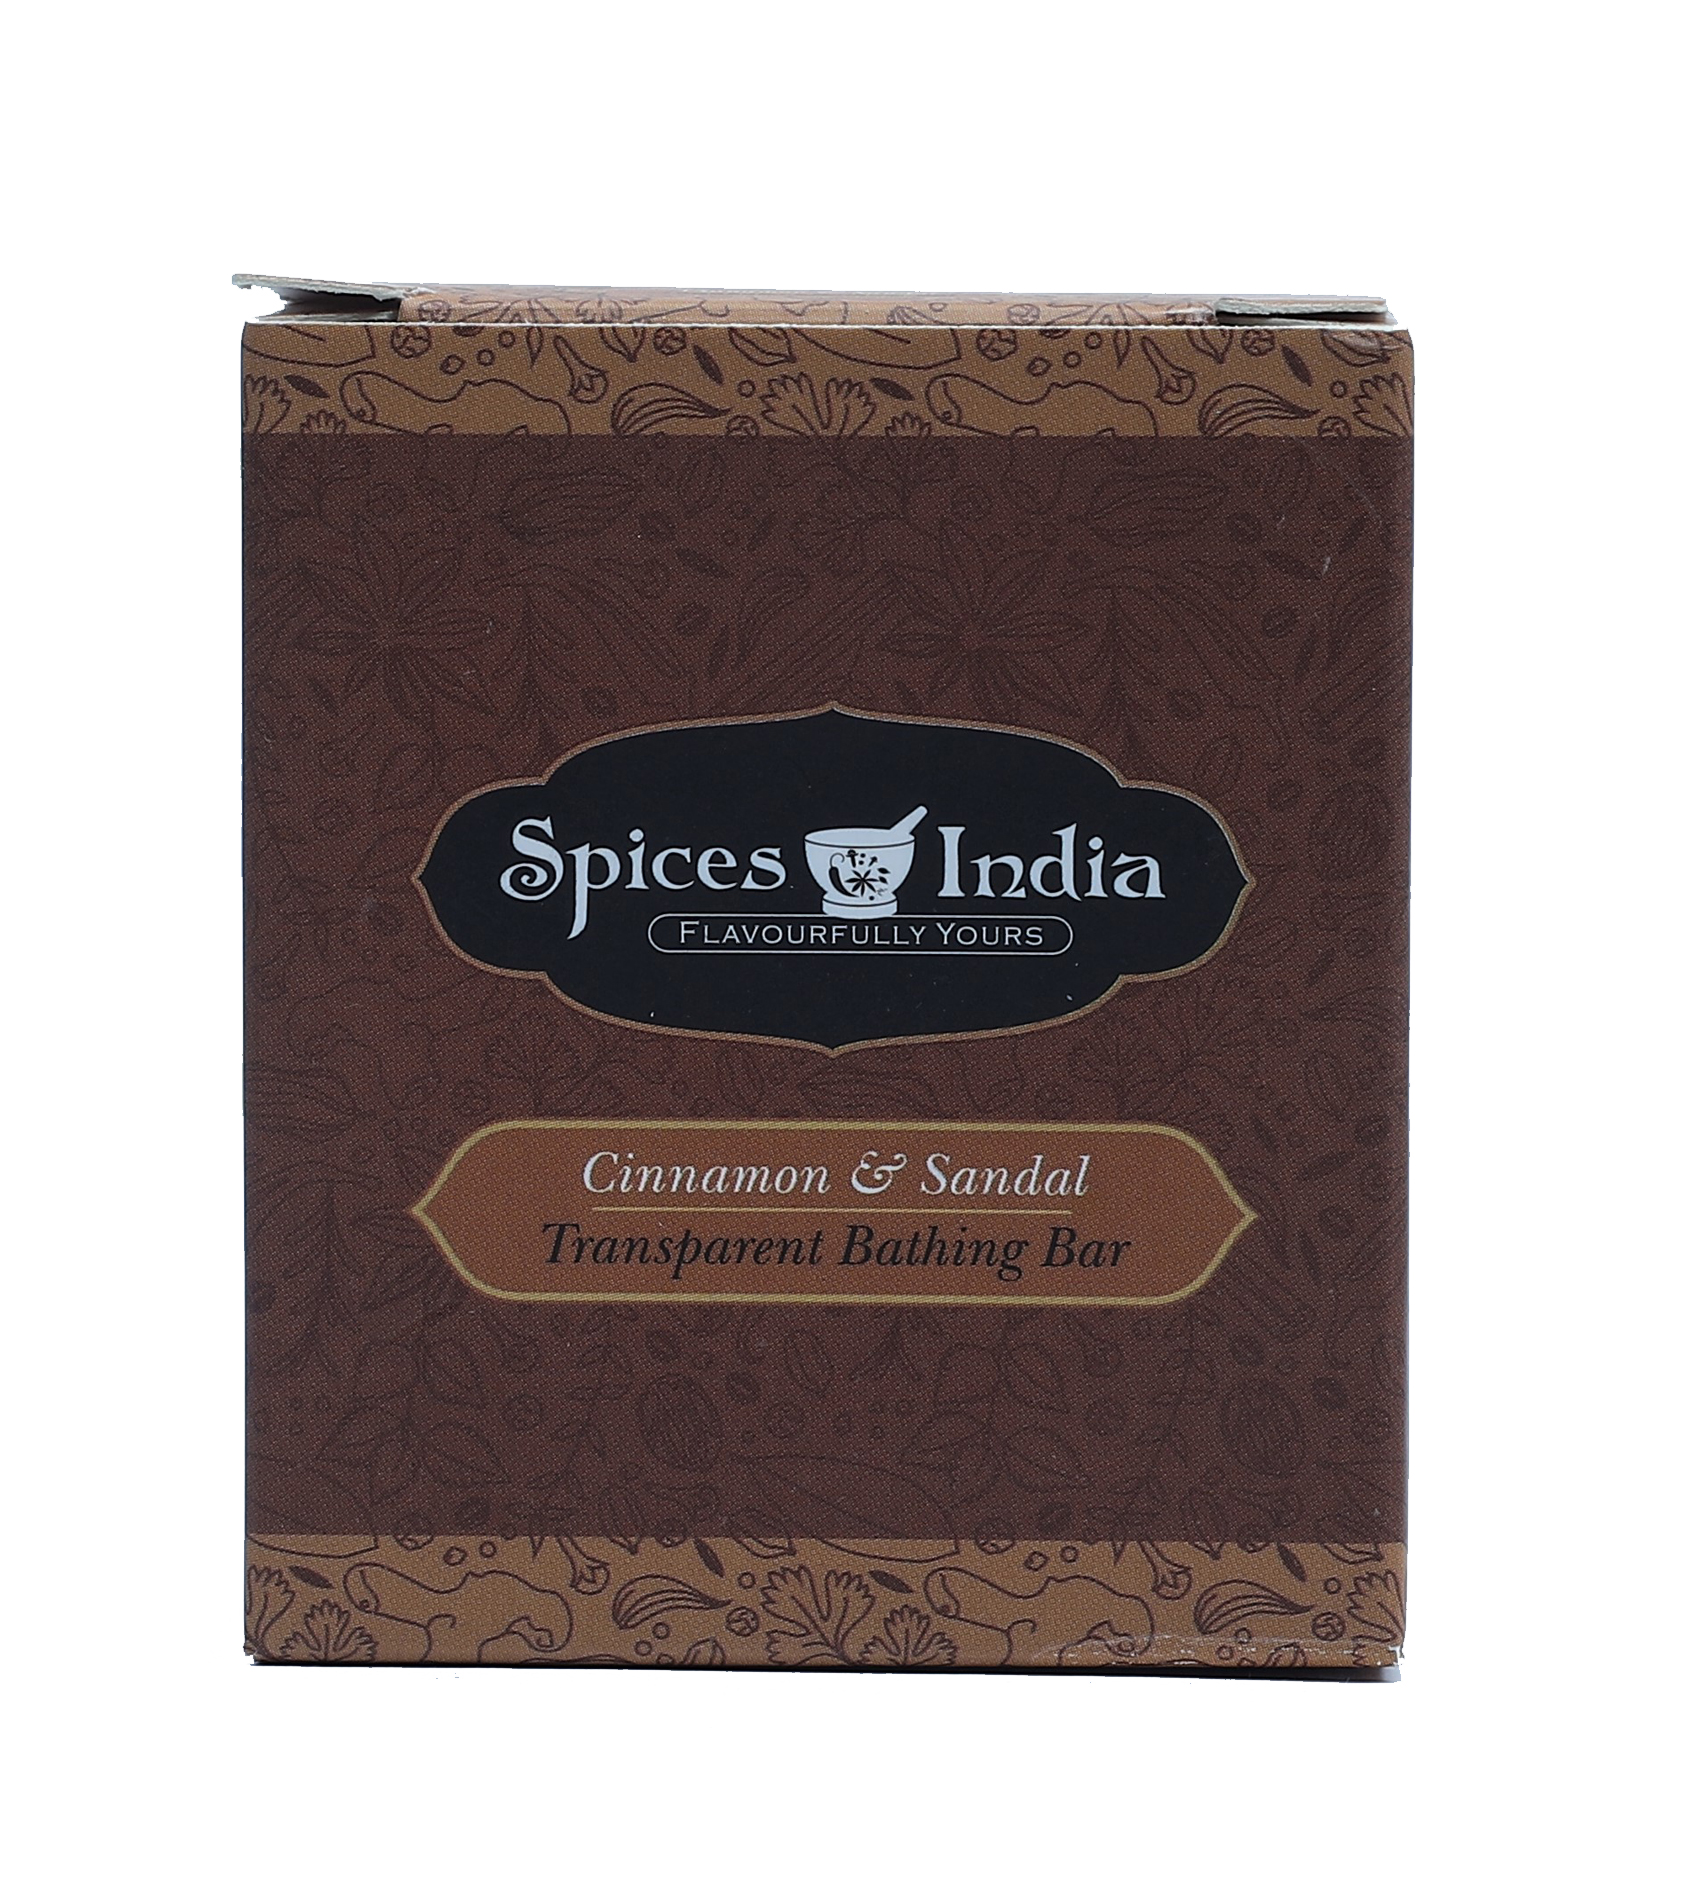 Spices India cinnamon and Sandal Transparent Bathing Bar